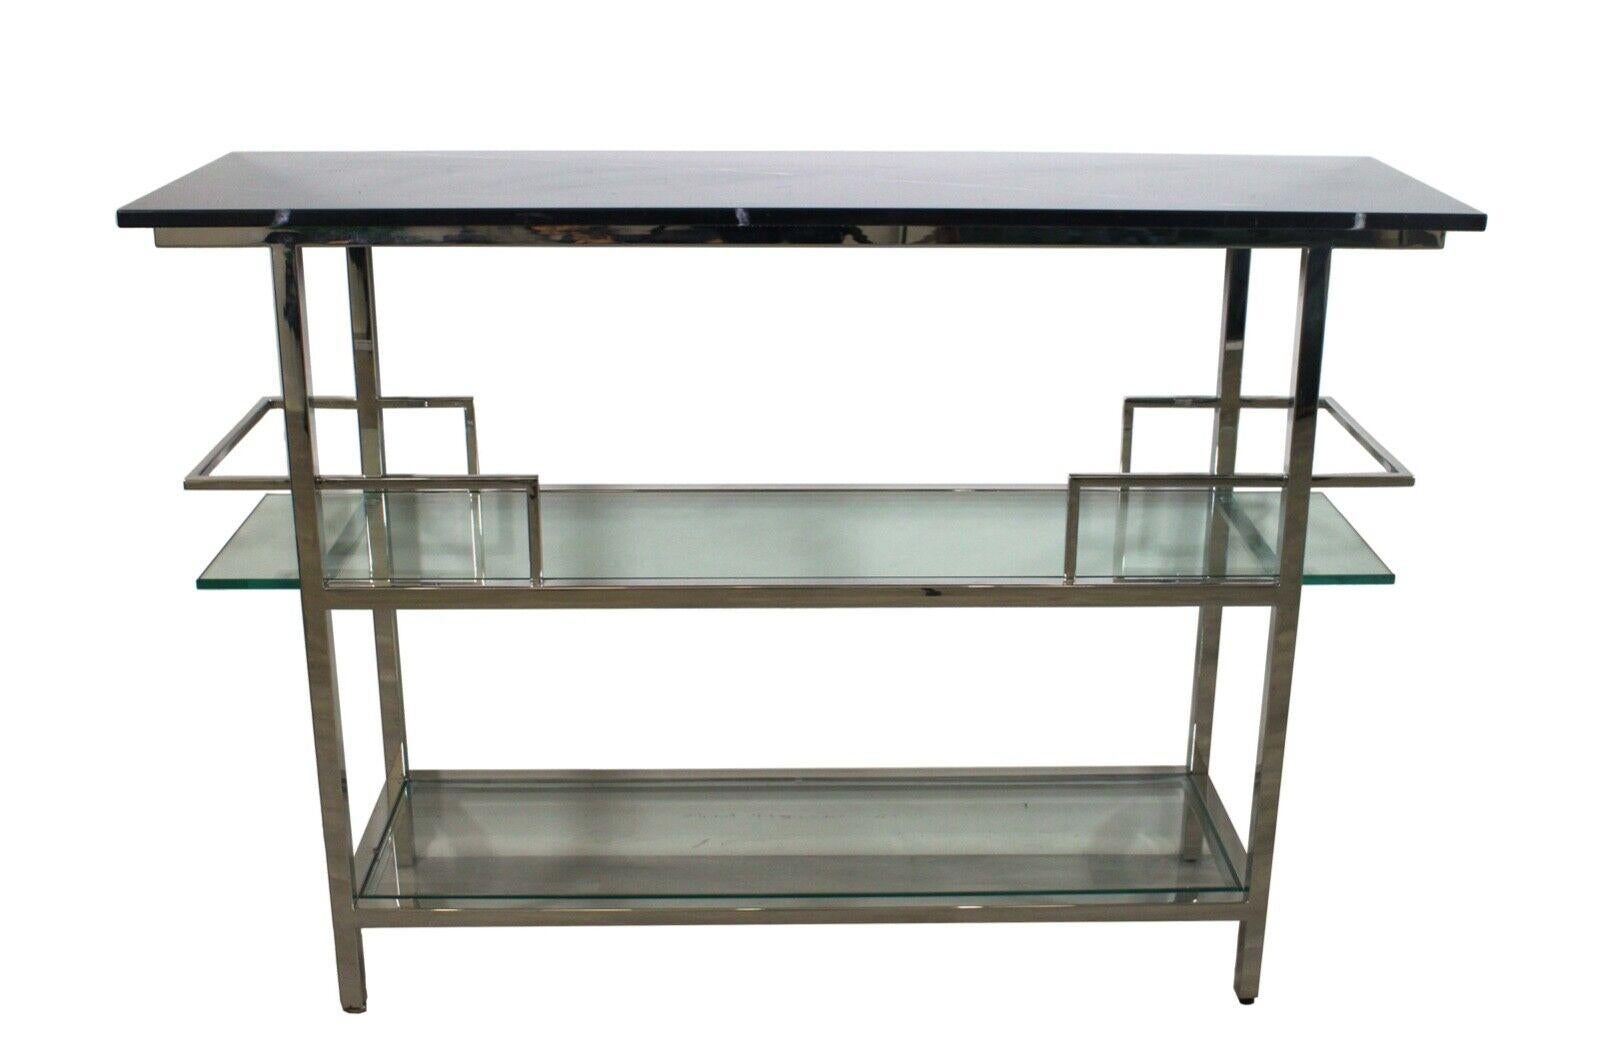 The Mitchell Gold + Bob Williams Modern Chrome, marble, & glass three tier bar cart is the perfect statement piece for your home. This chic and stylish cart features a glossy chrome frame with mirrored glass shelves, combined with a black marble top